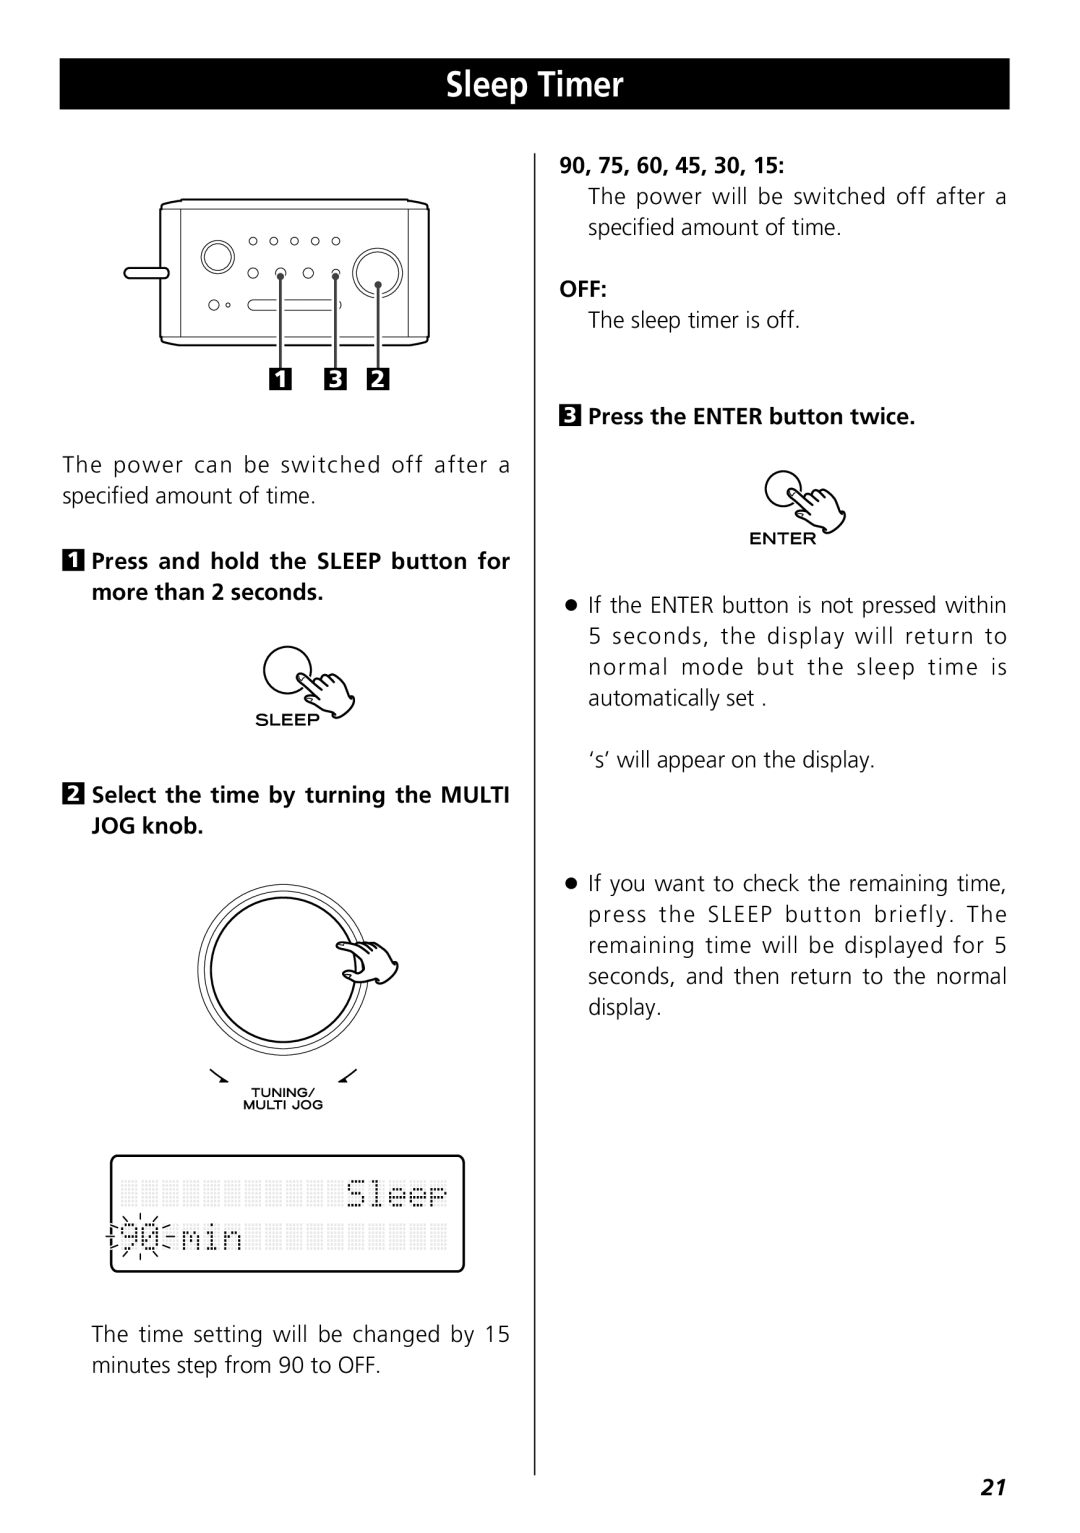 Teac R-3 owner manual Sleep Timer, 2Select the time by turning the MULTI JOG knob, 3Press the ENTER button twice 